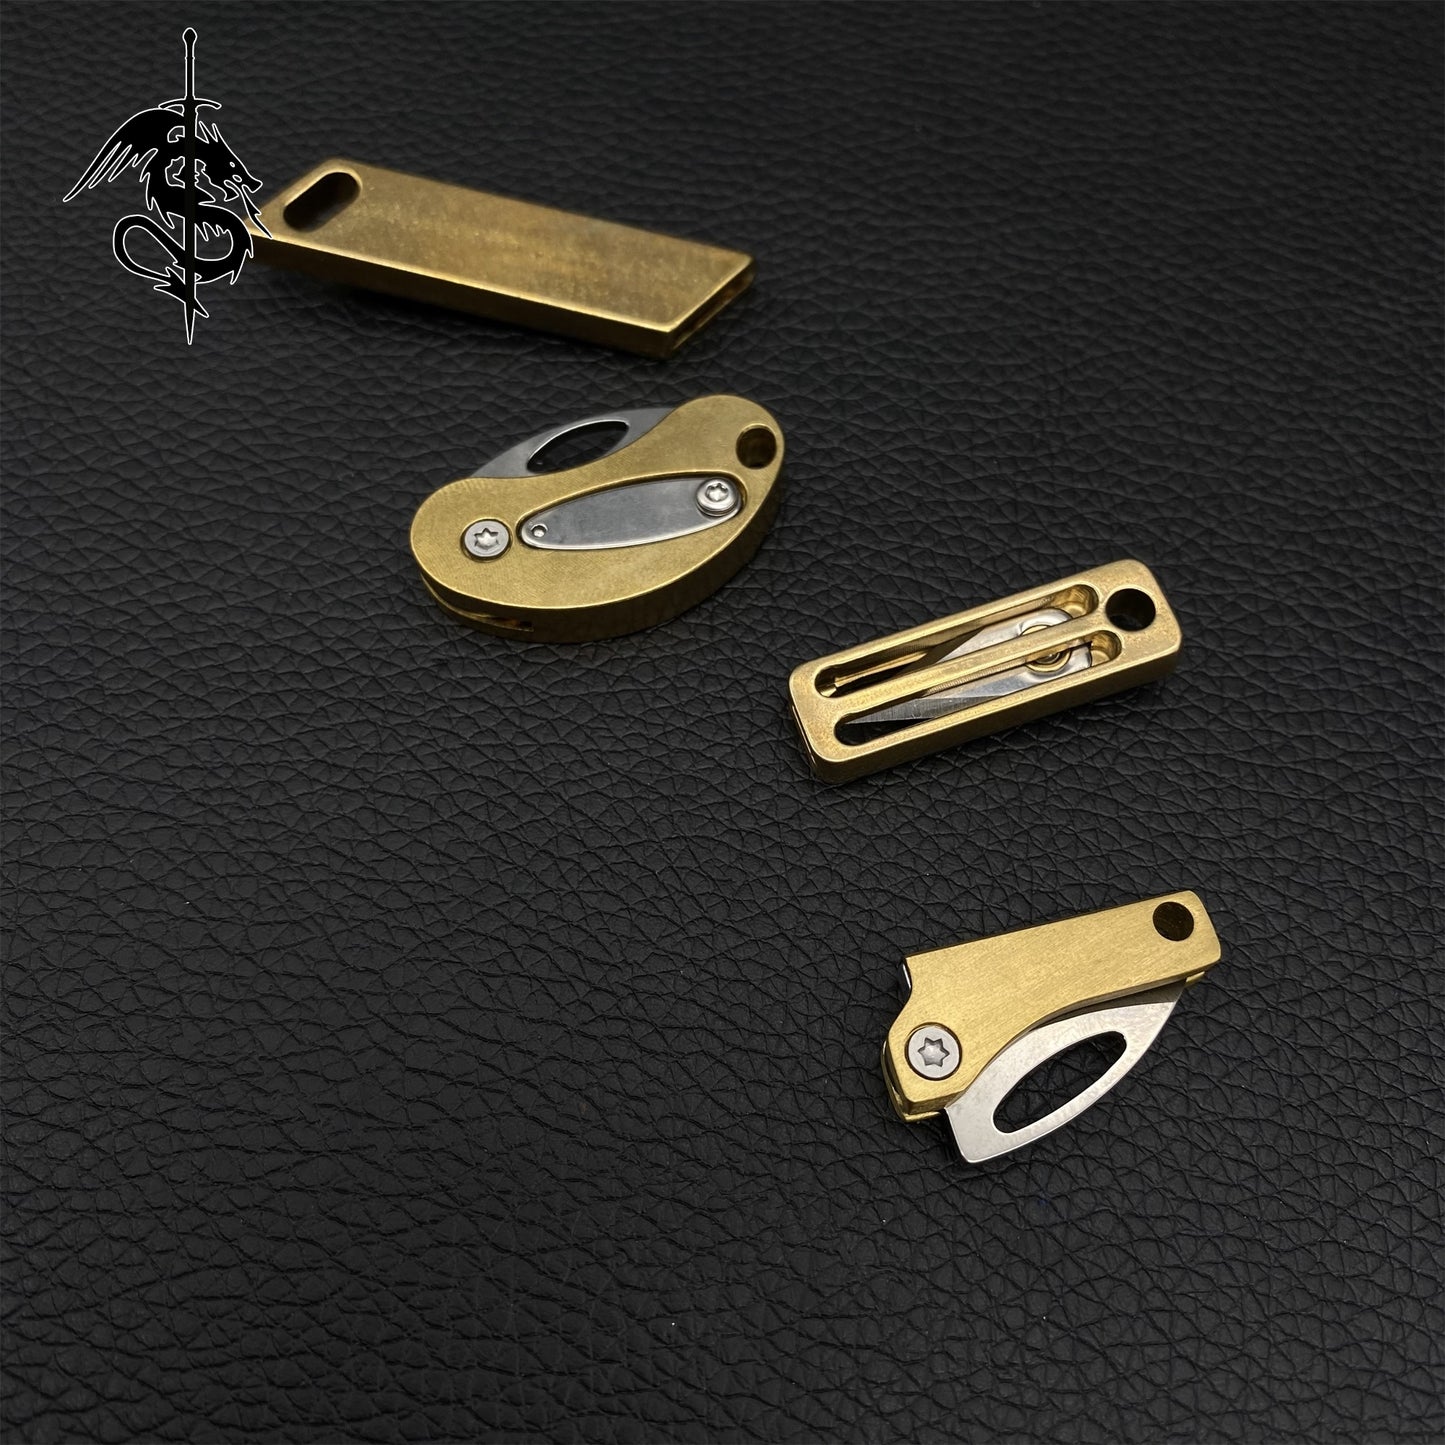 Brass Handle Creative Tiny EDC Out Tool Knife 4 In 1 Pack